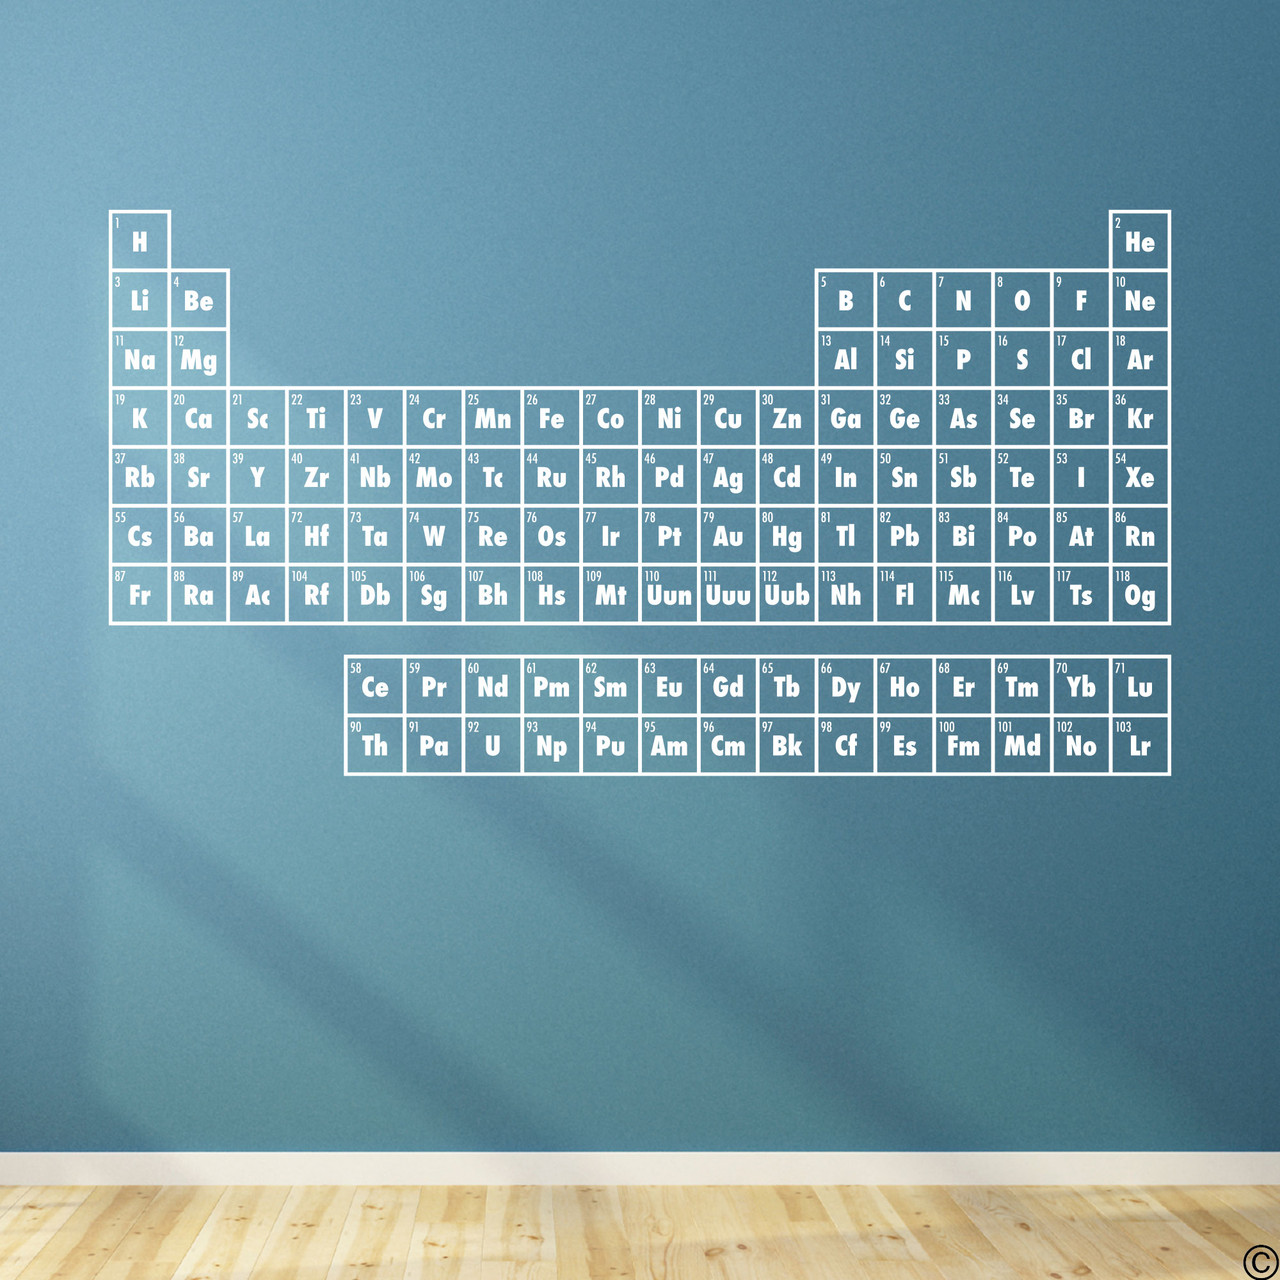 The Periodic Table of Elements wall decal shown here in white vinyl.